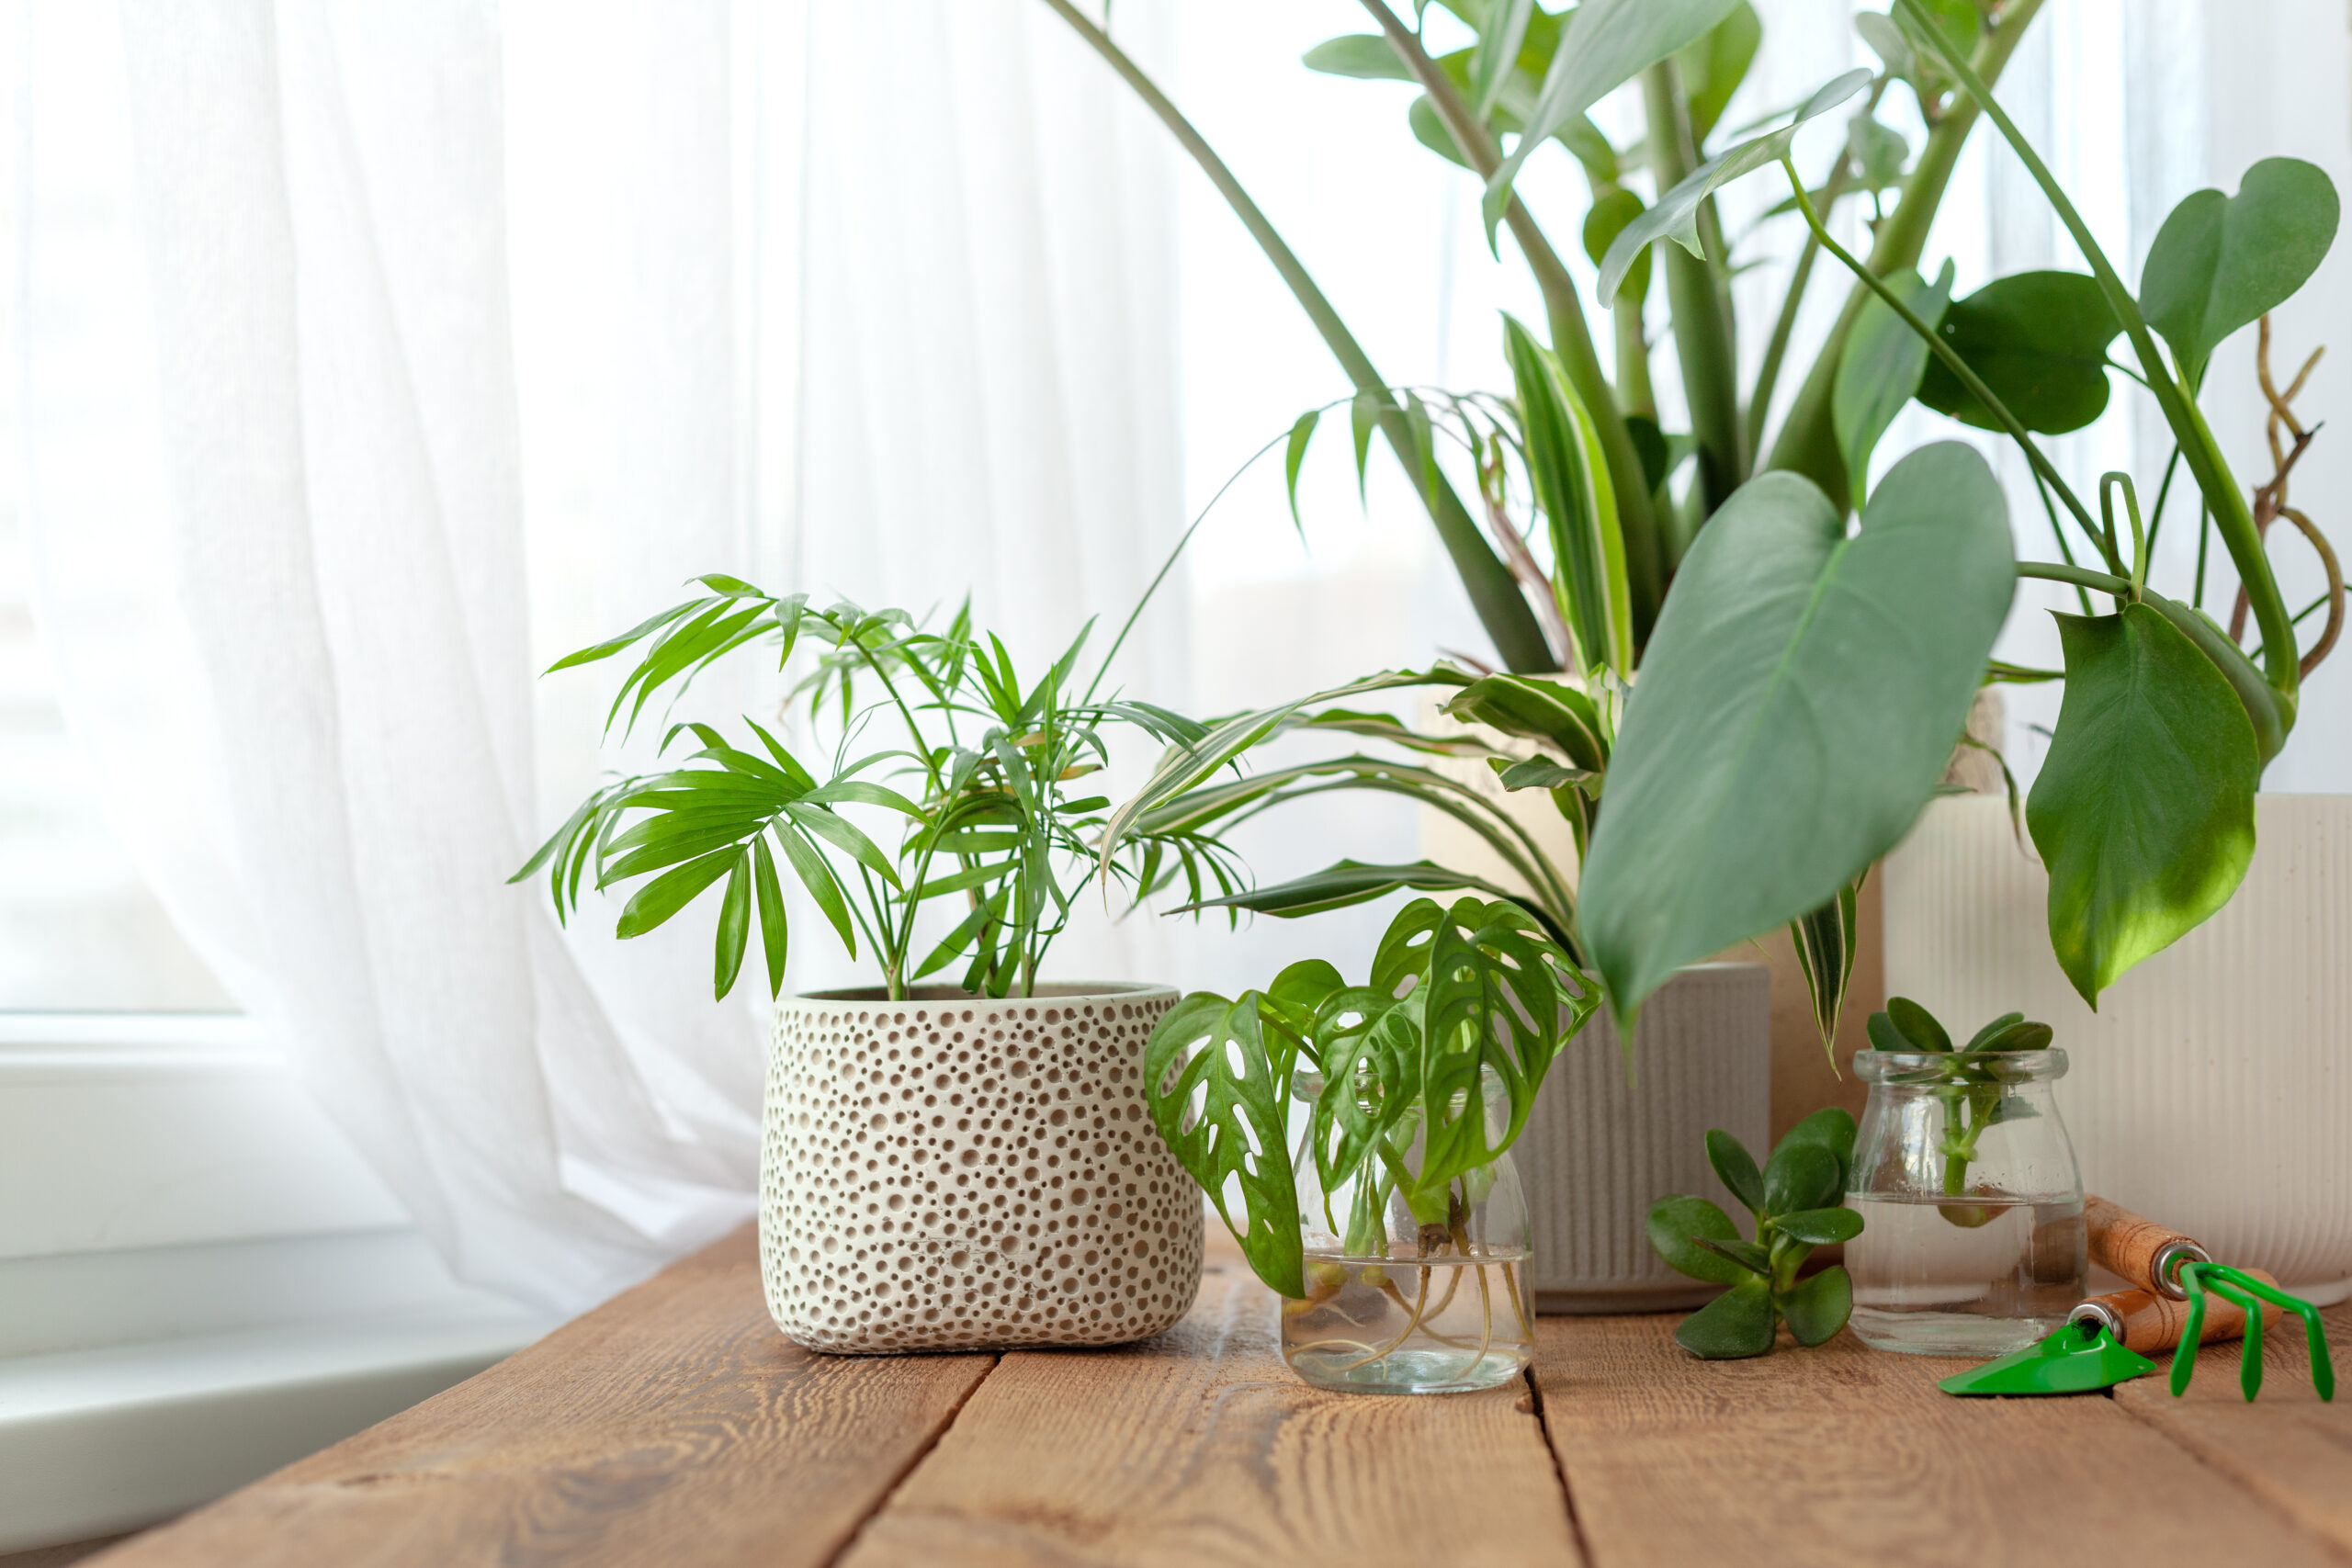 Can Plants Improve Indoor Air Quality?